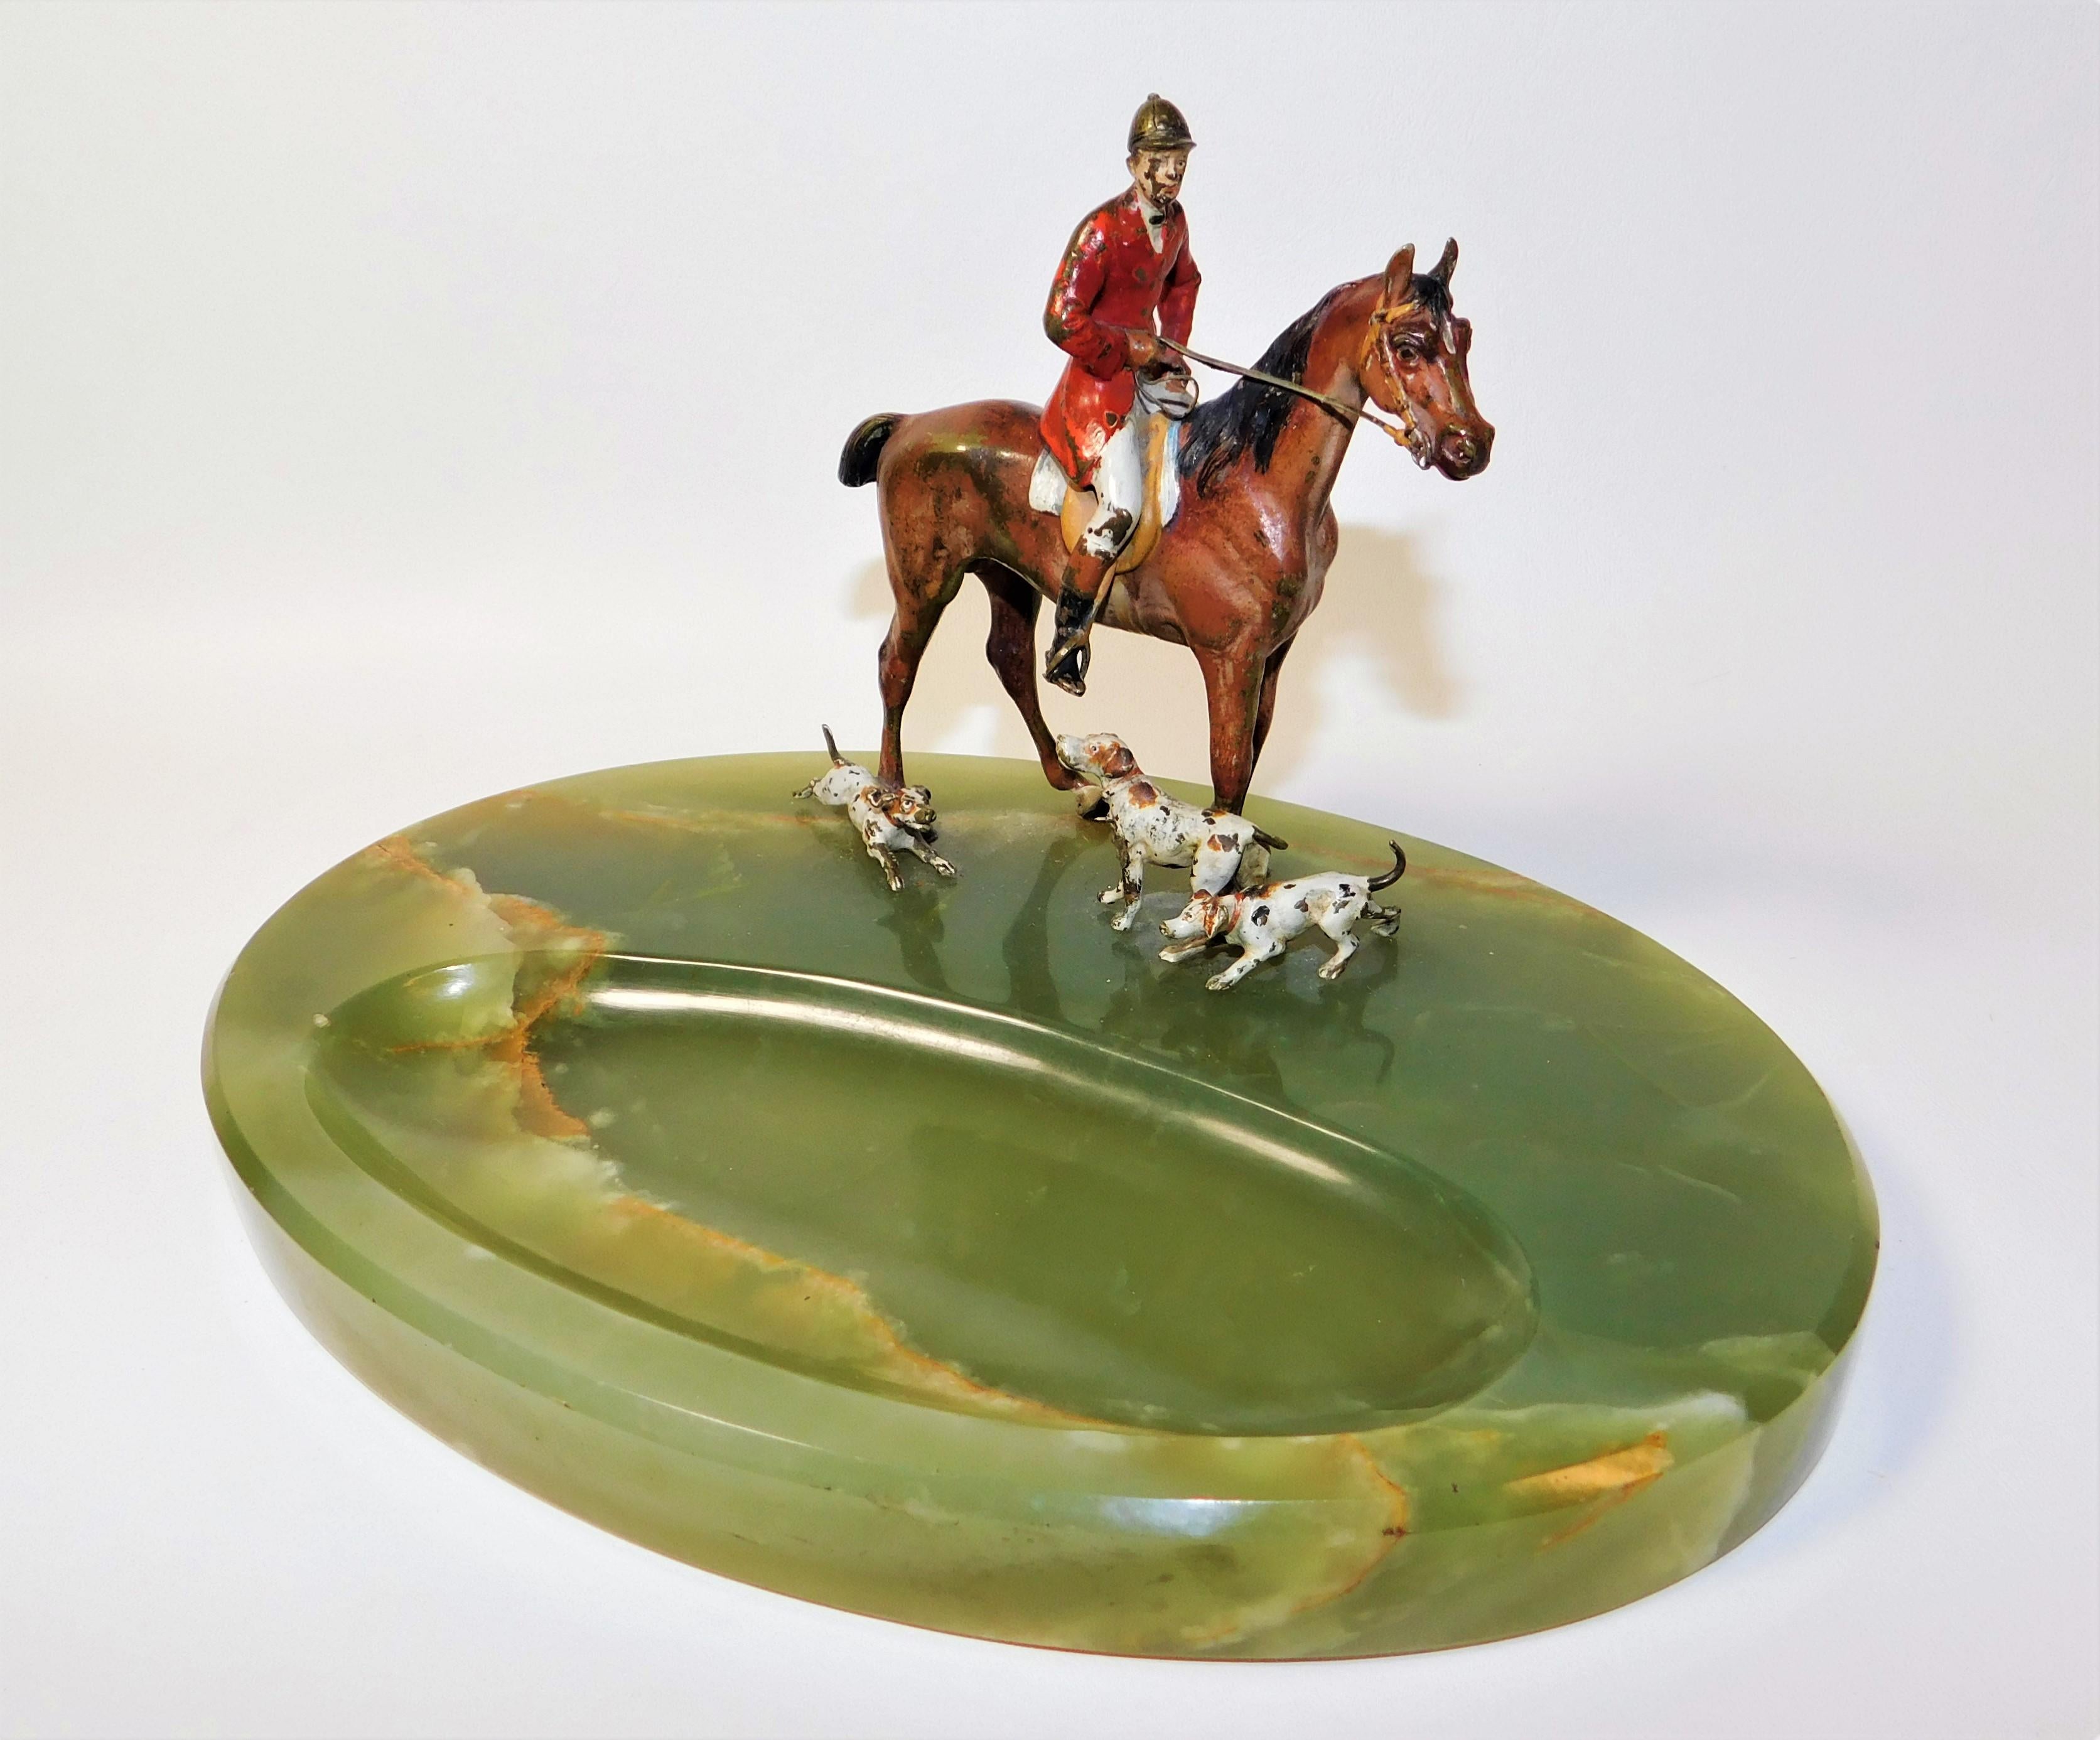 Beautiful desk accessory for the fox hunter. Austrian/Vienna cold painted bronze fox hunter on his horse with his three hounds. Onyx base with letter opener or pen well/tray in excellent condition, felt on bottom. Some paint loss on the rider, horse